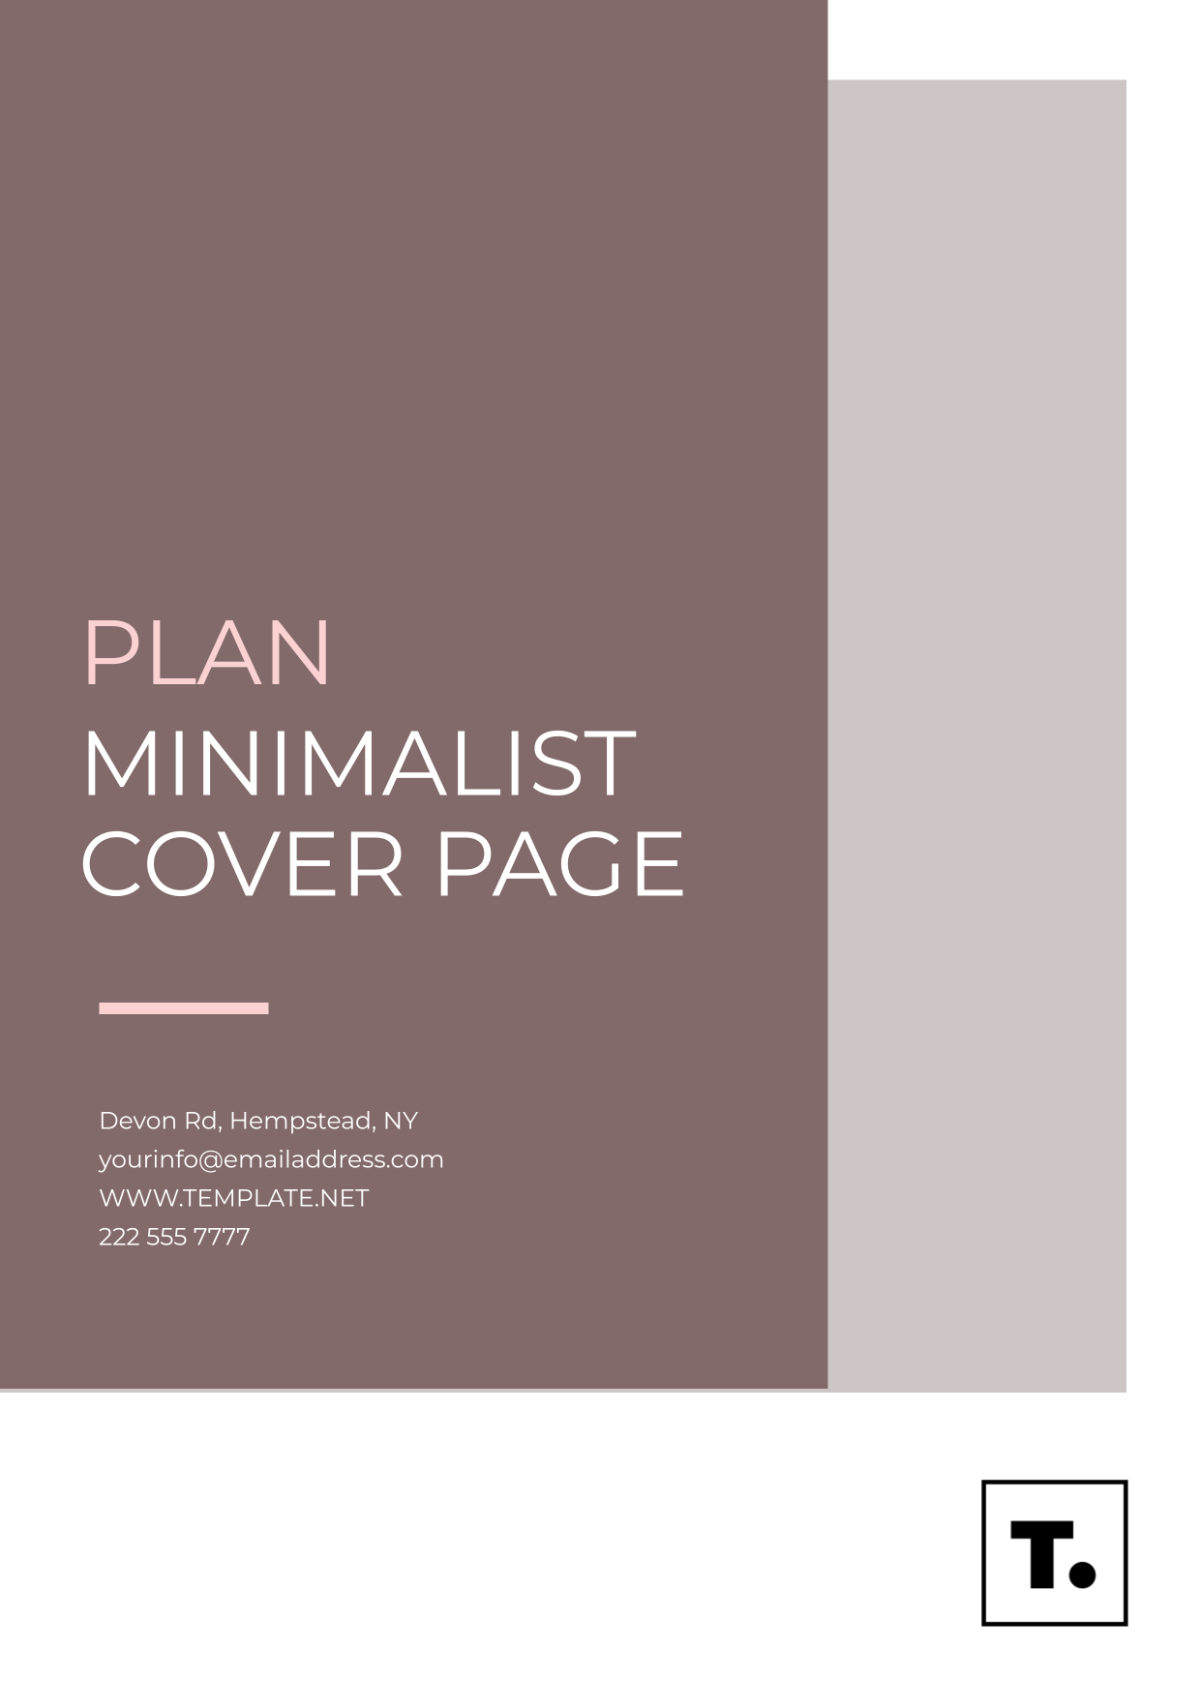 Plan Minimalist Cover Page